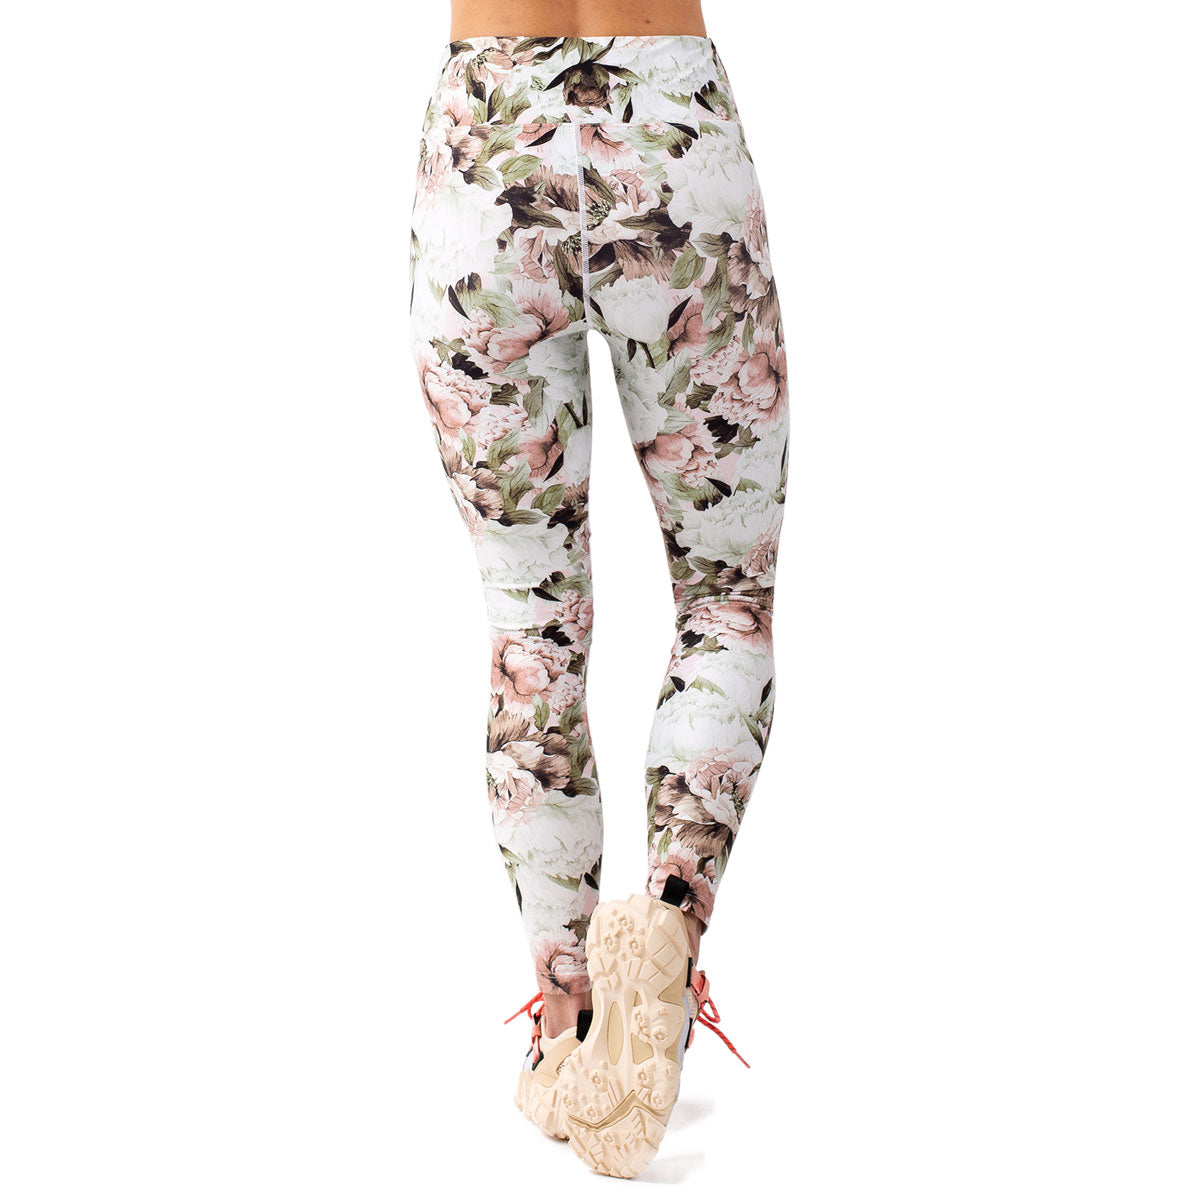 Eivy Icecold Tights Snowboard Base Layer - Bloom image 2